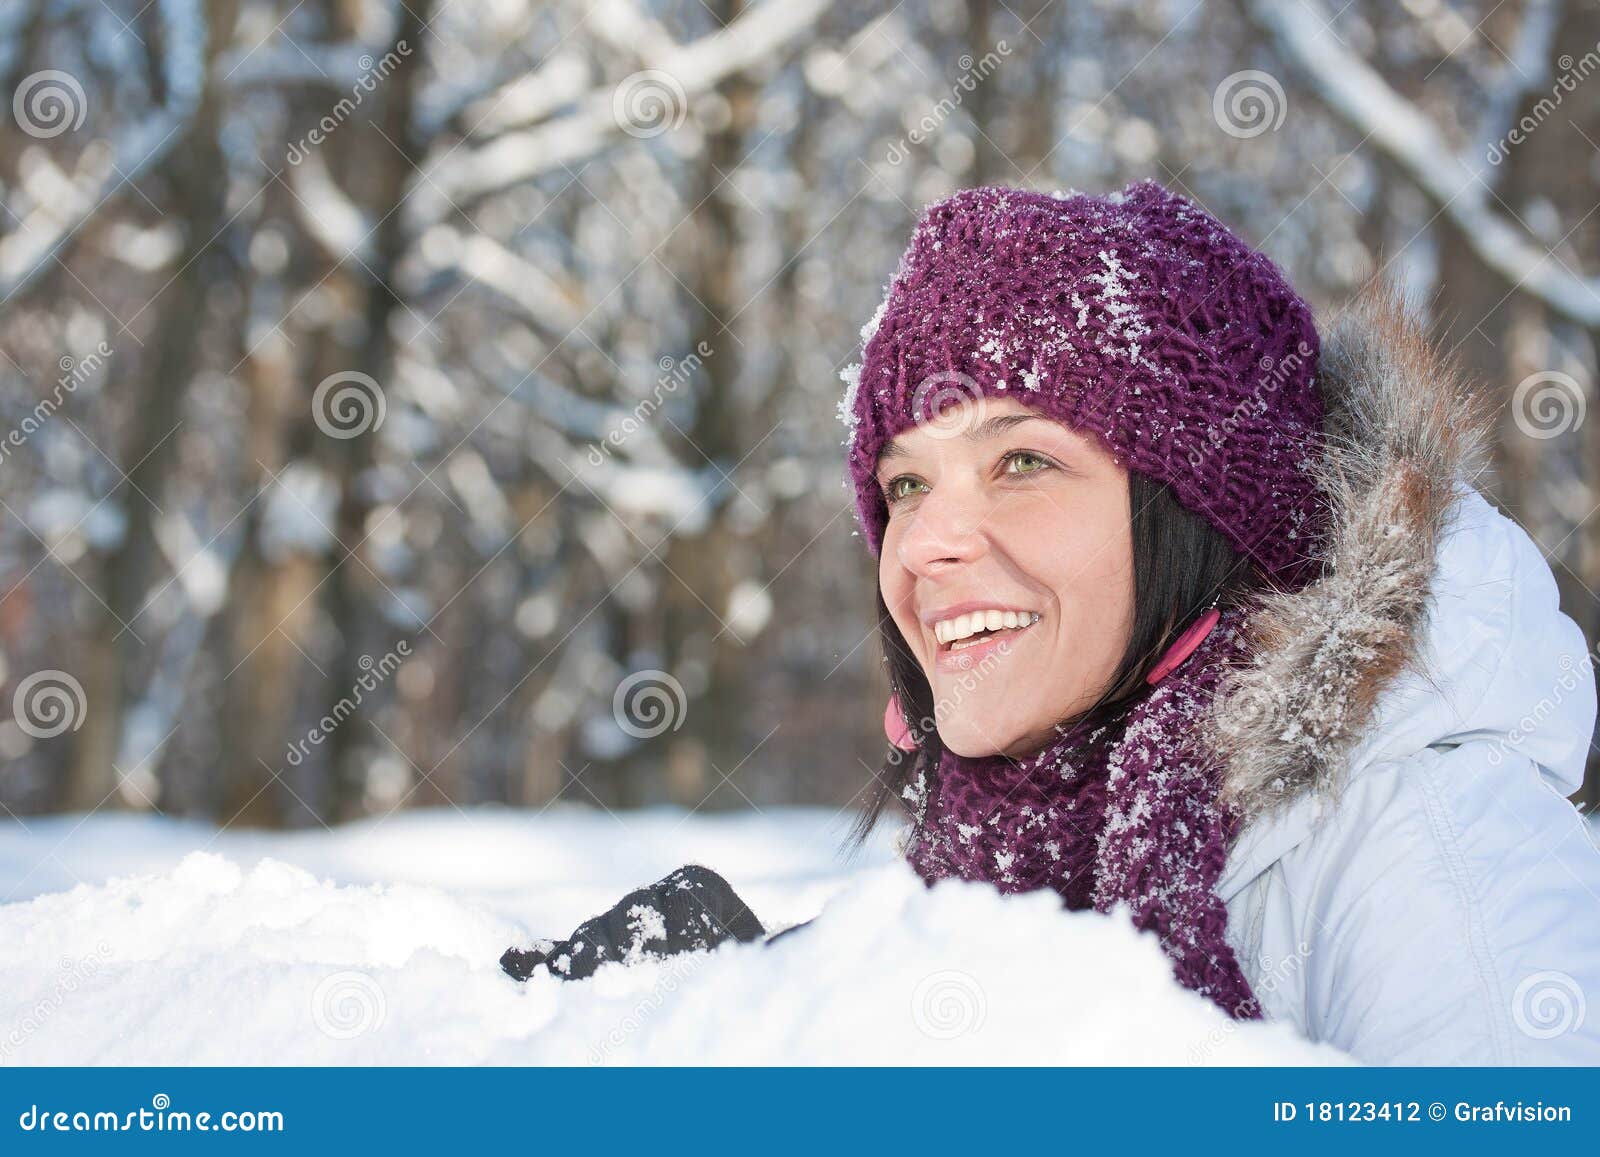 Woman in snow stock photo. Image of smiling, fashion - 18123412